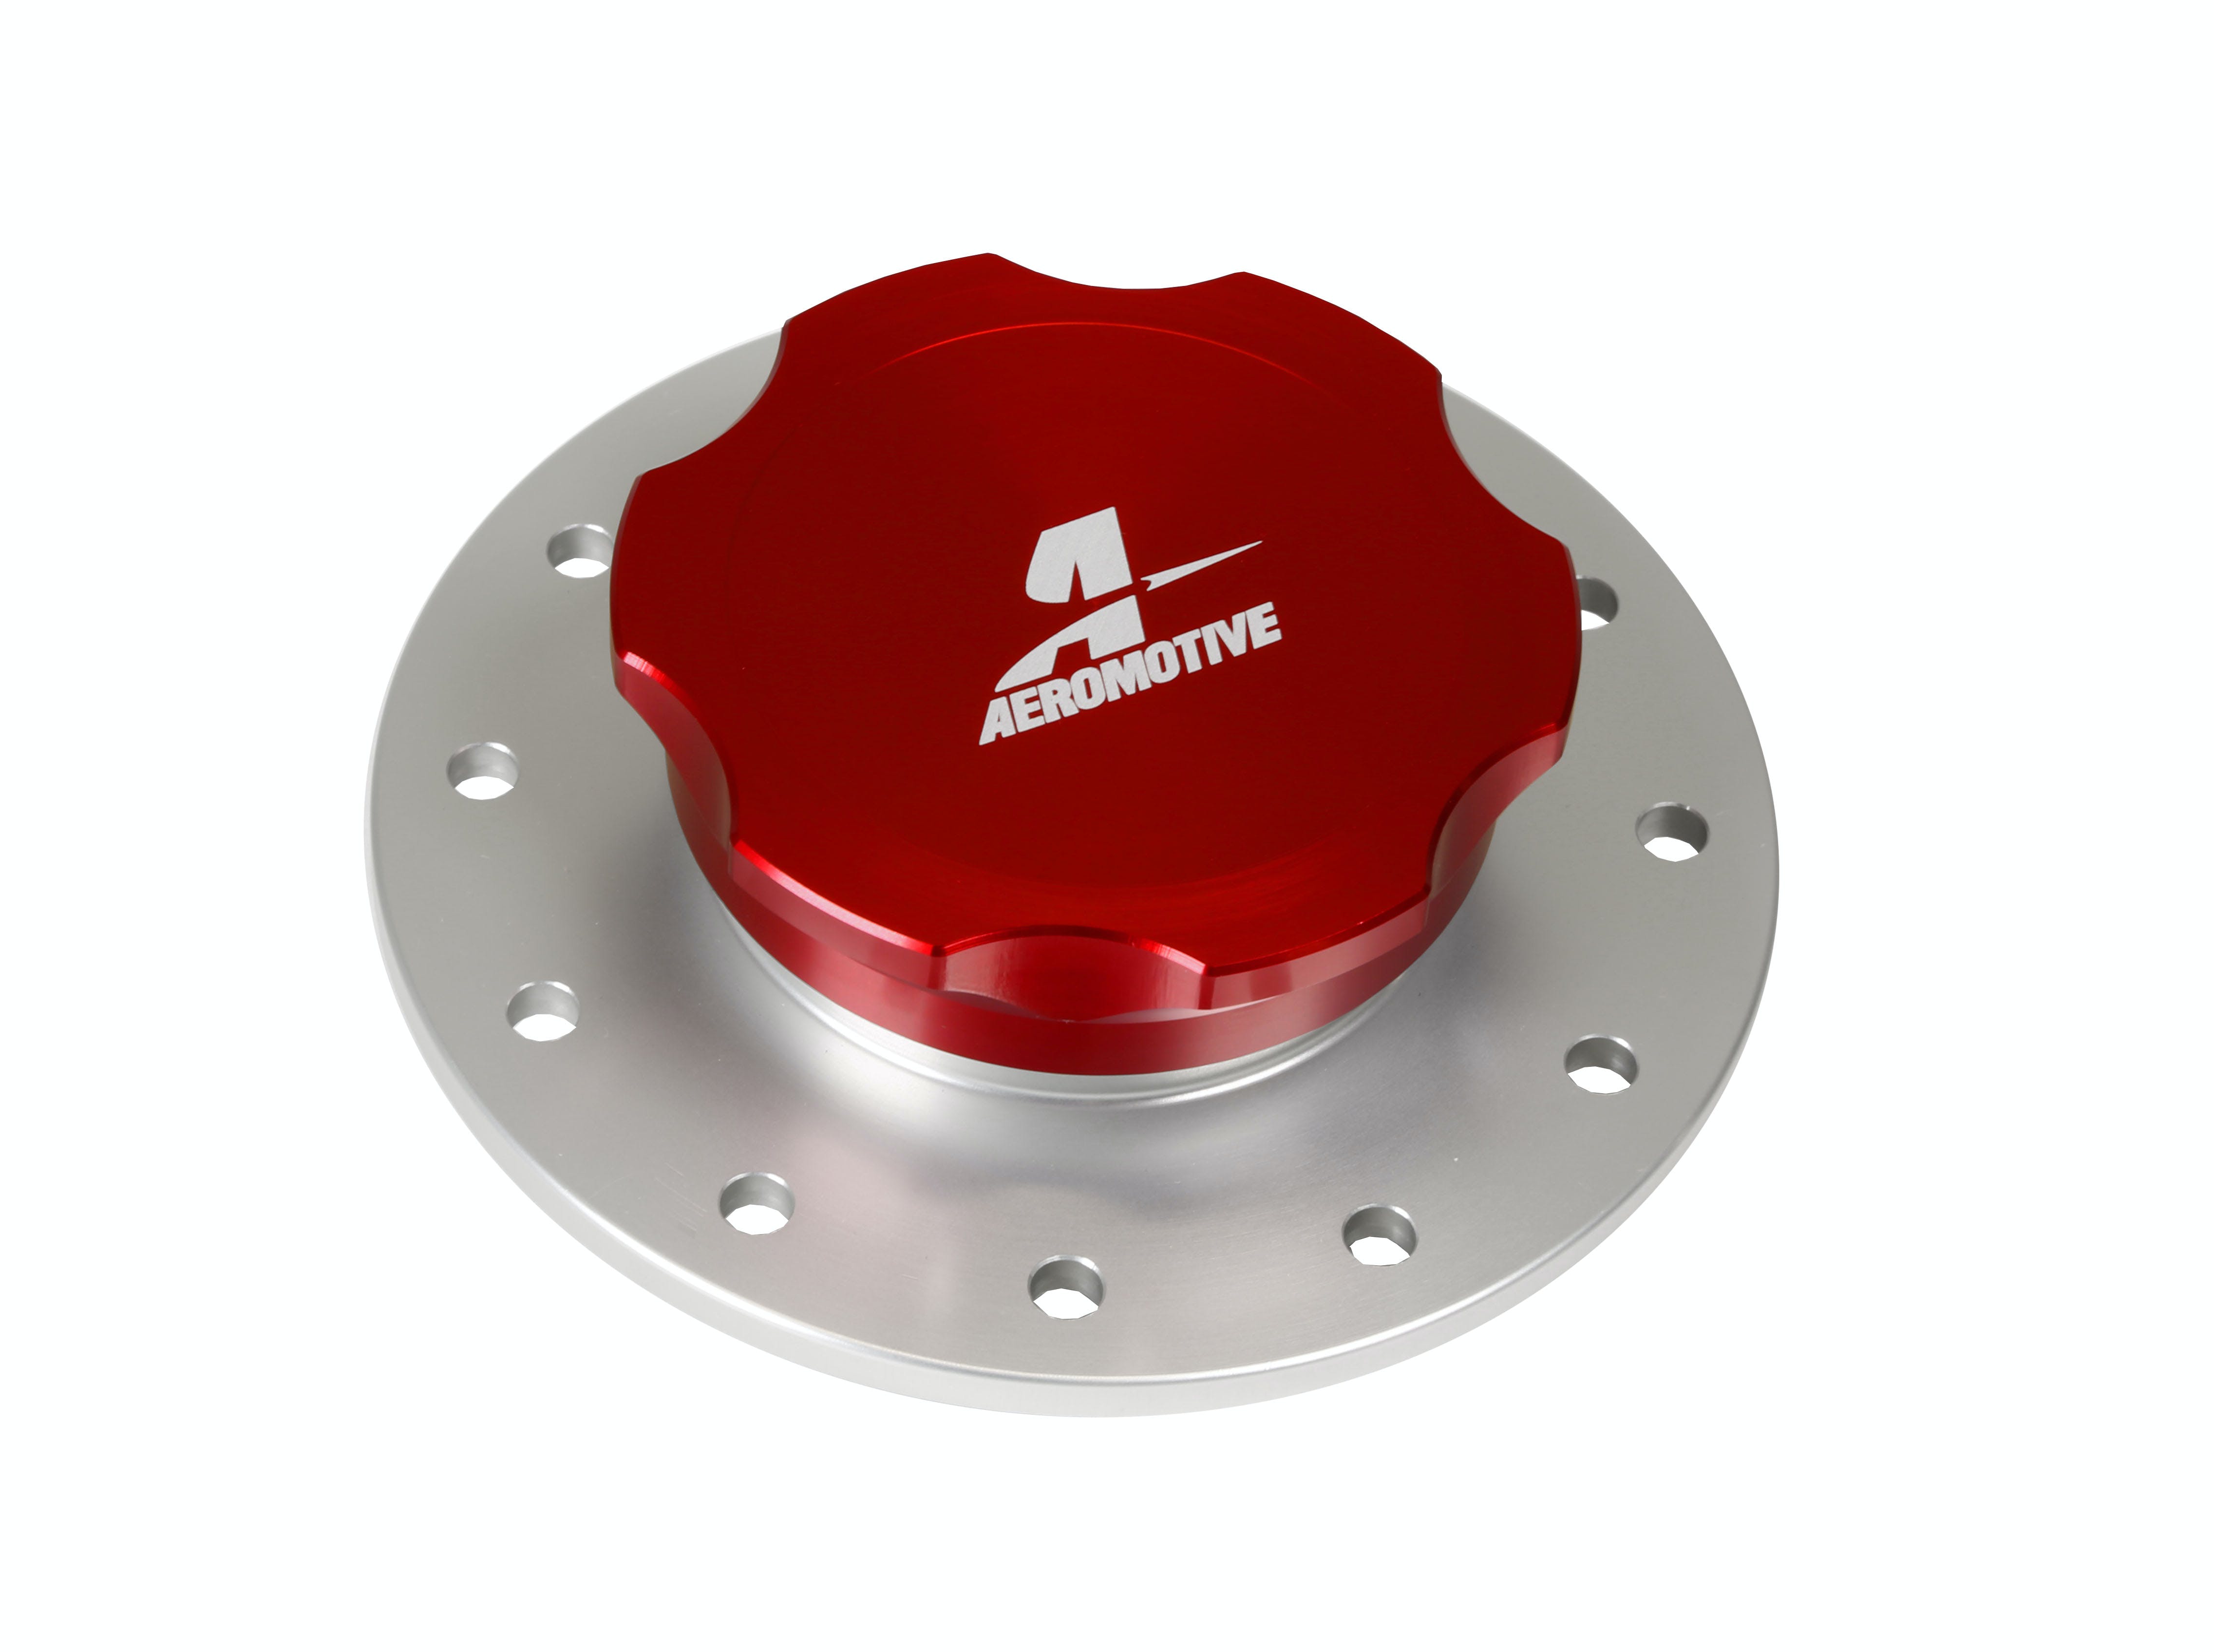 Aeromotive Fuel System 18707 Screw-On Fill Cap, 3-inch, Flanged, 12-Bolt